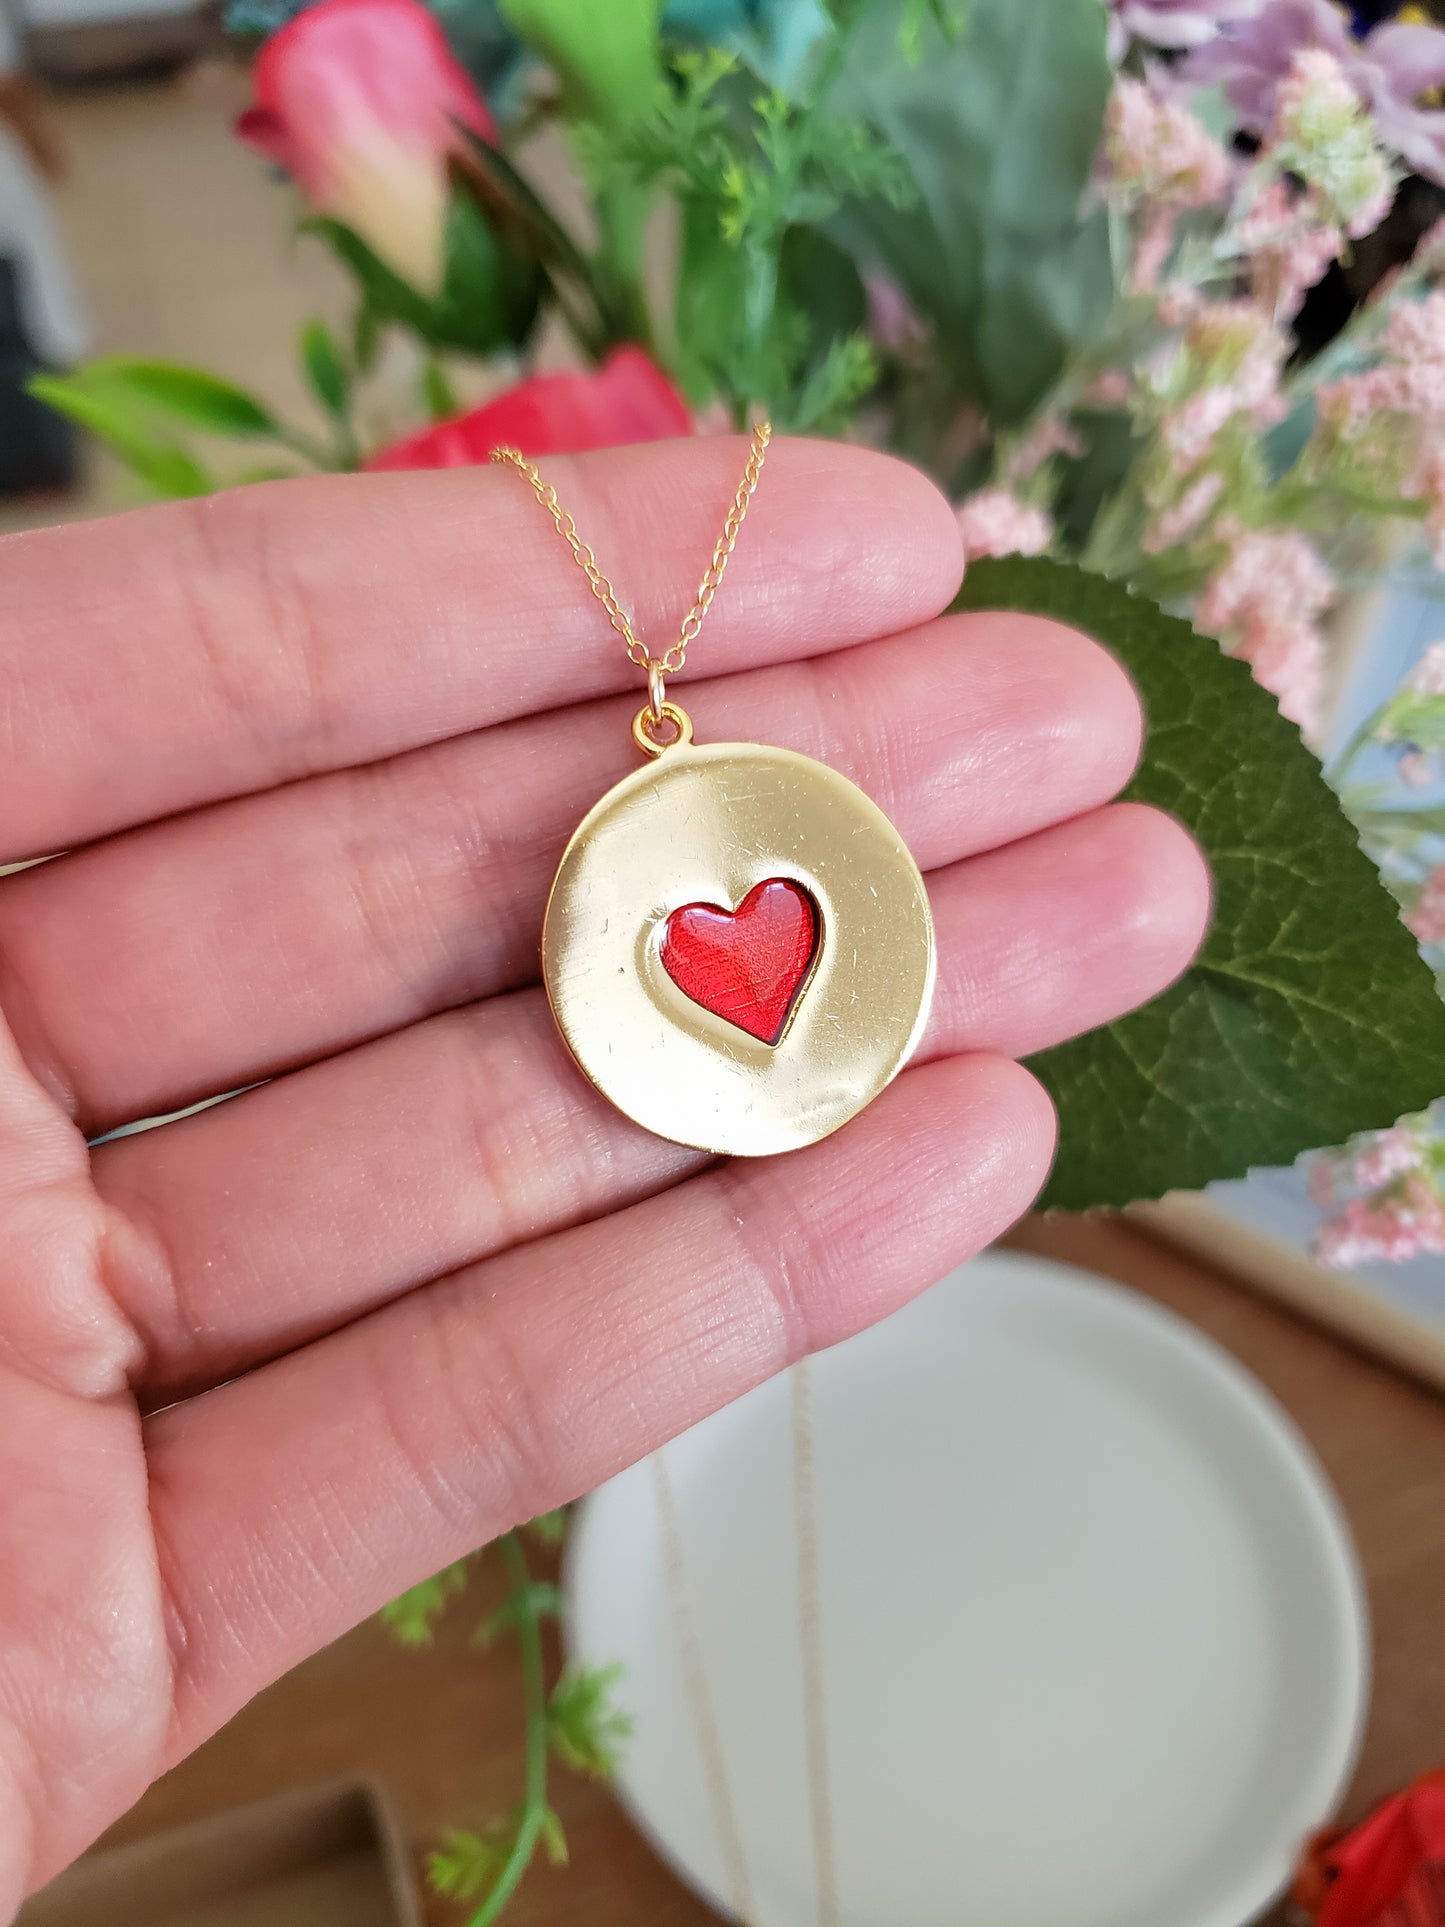 Catch My Heart Necklace in Red